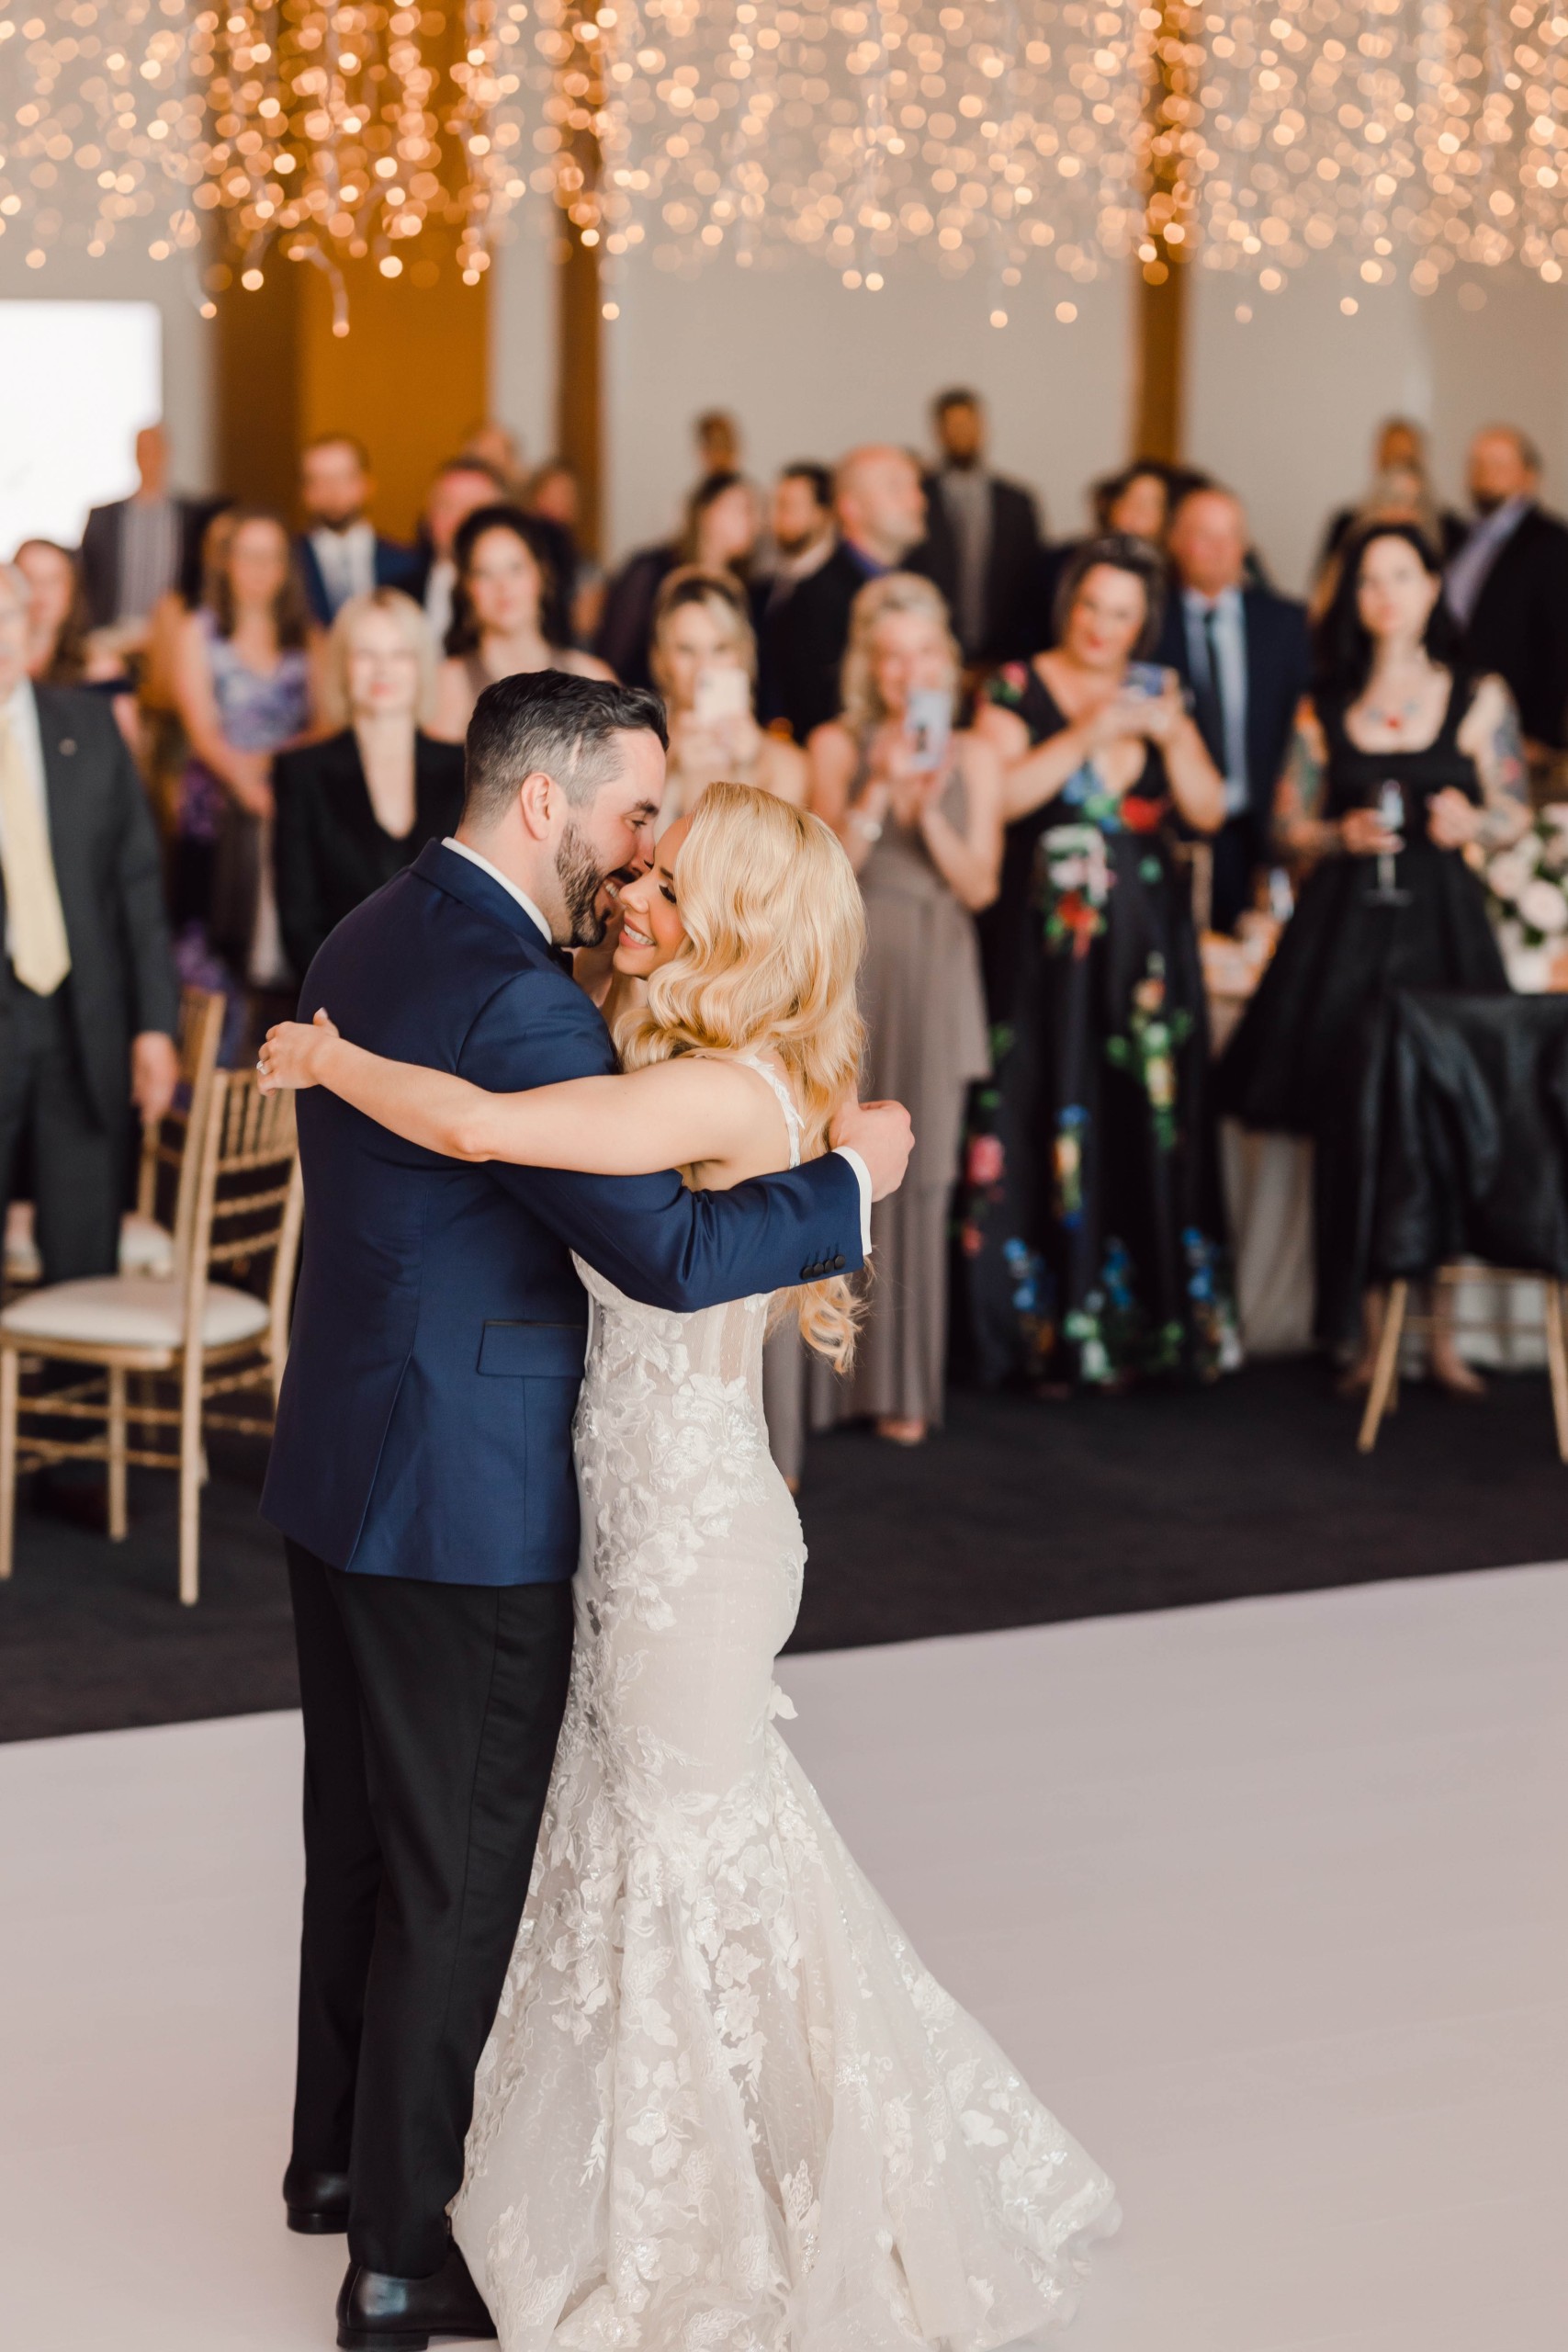 First Dance during Reception at the AGO